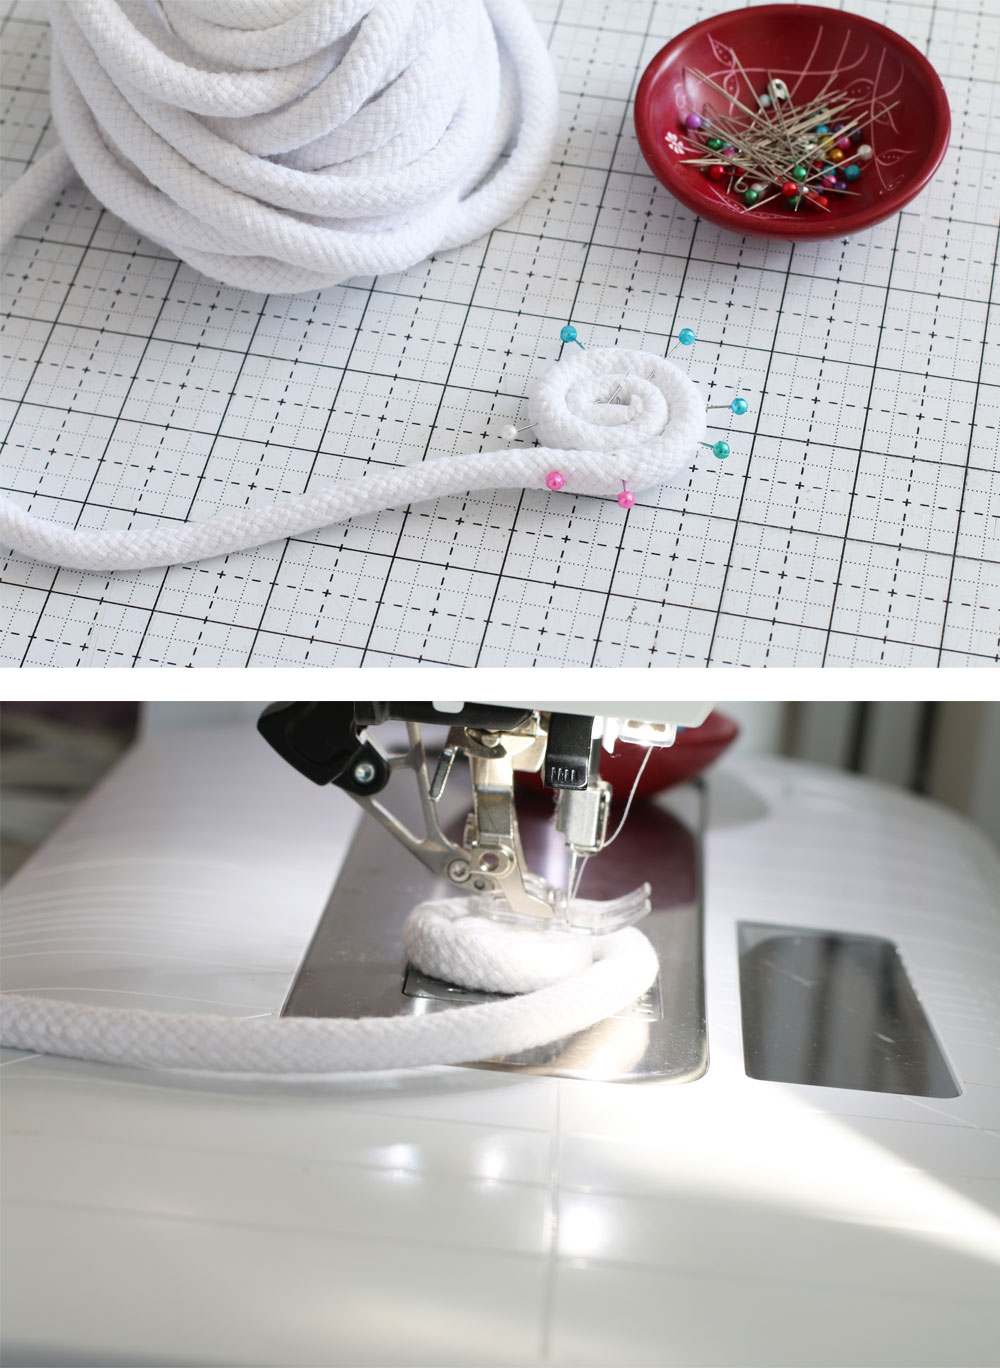 This fabric scrap rope bowl tutorial is simple to follow and will show you how to make a beautiful decoration using leftover fabric. suzyquilts.com #sewingdiy #sewingtutorial